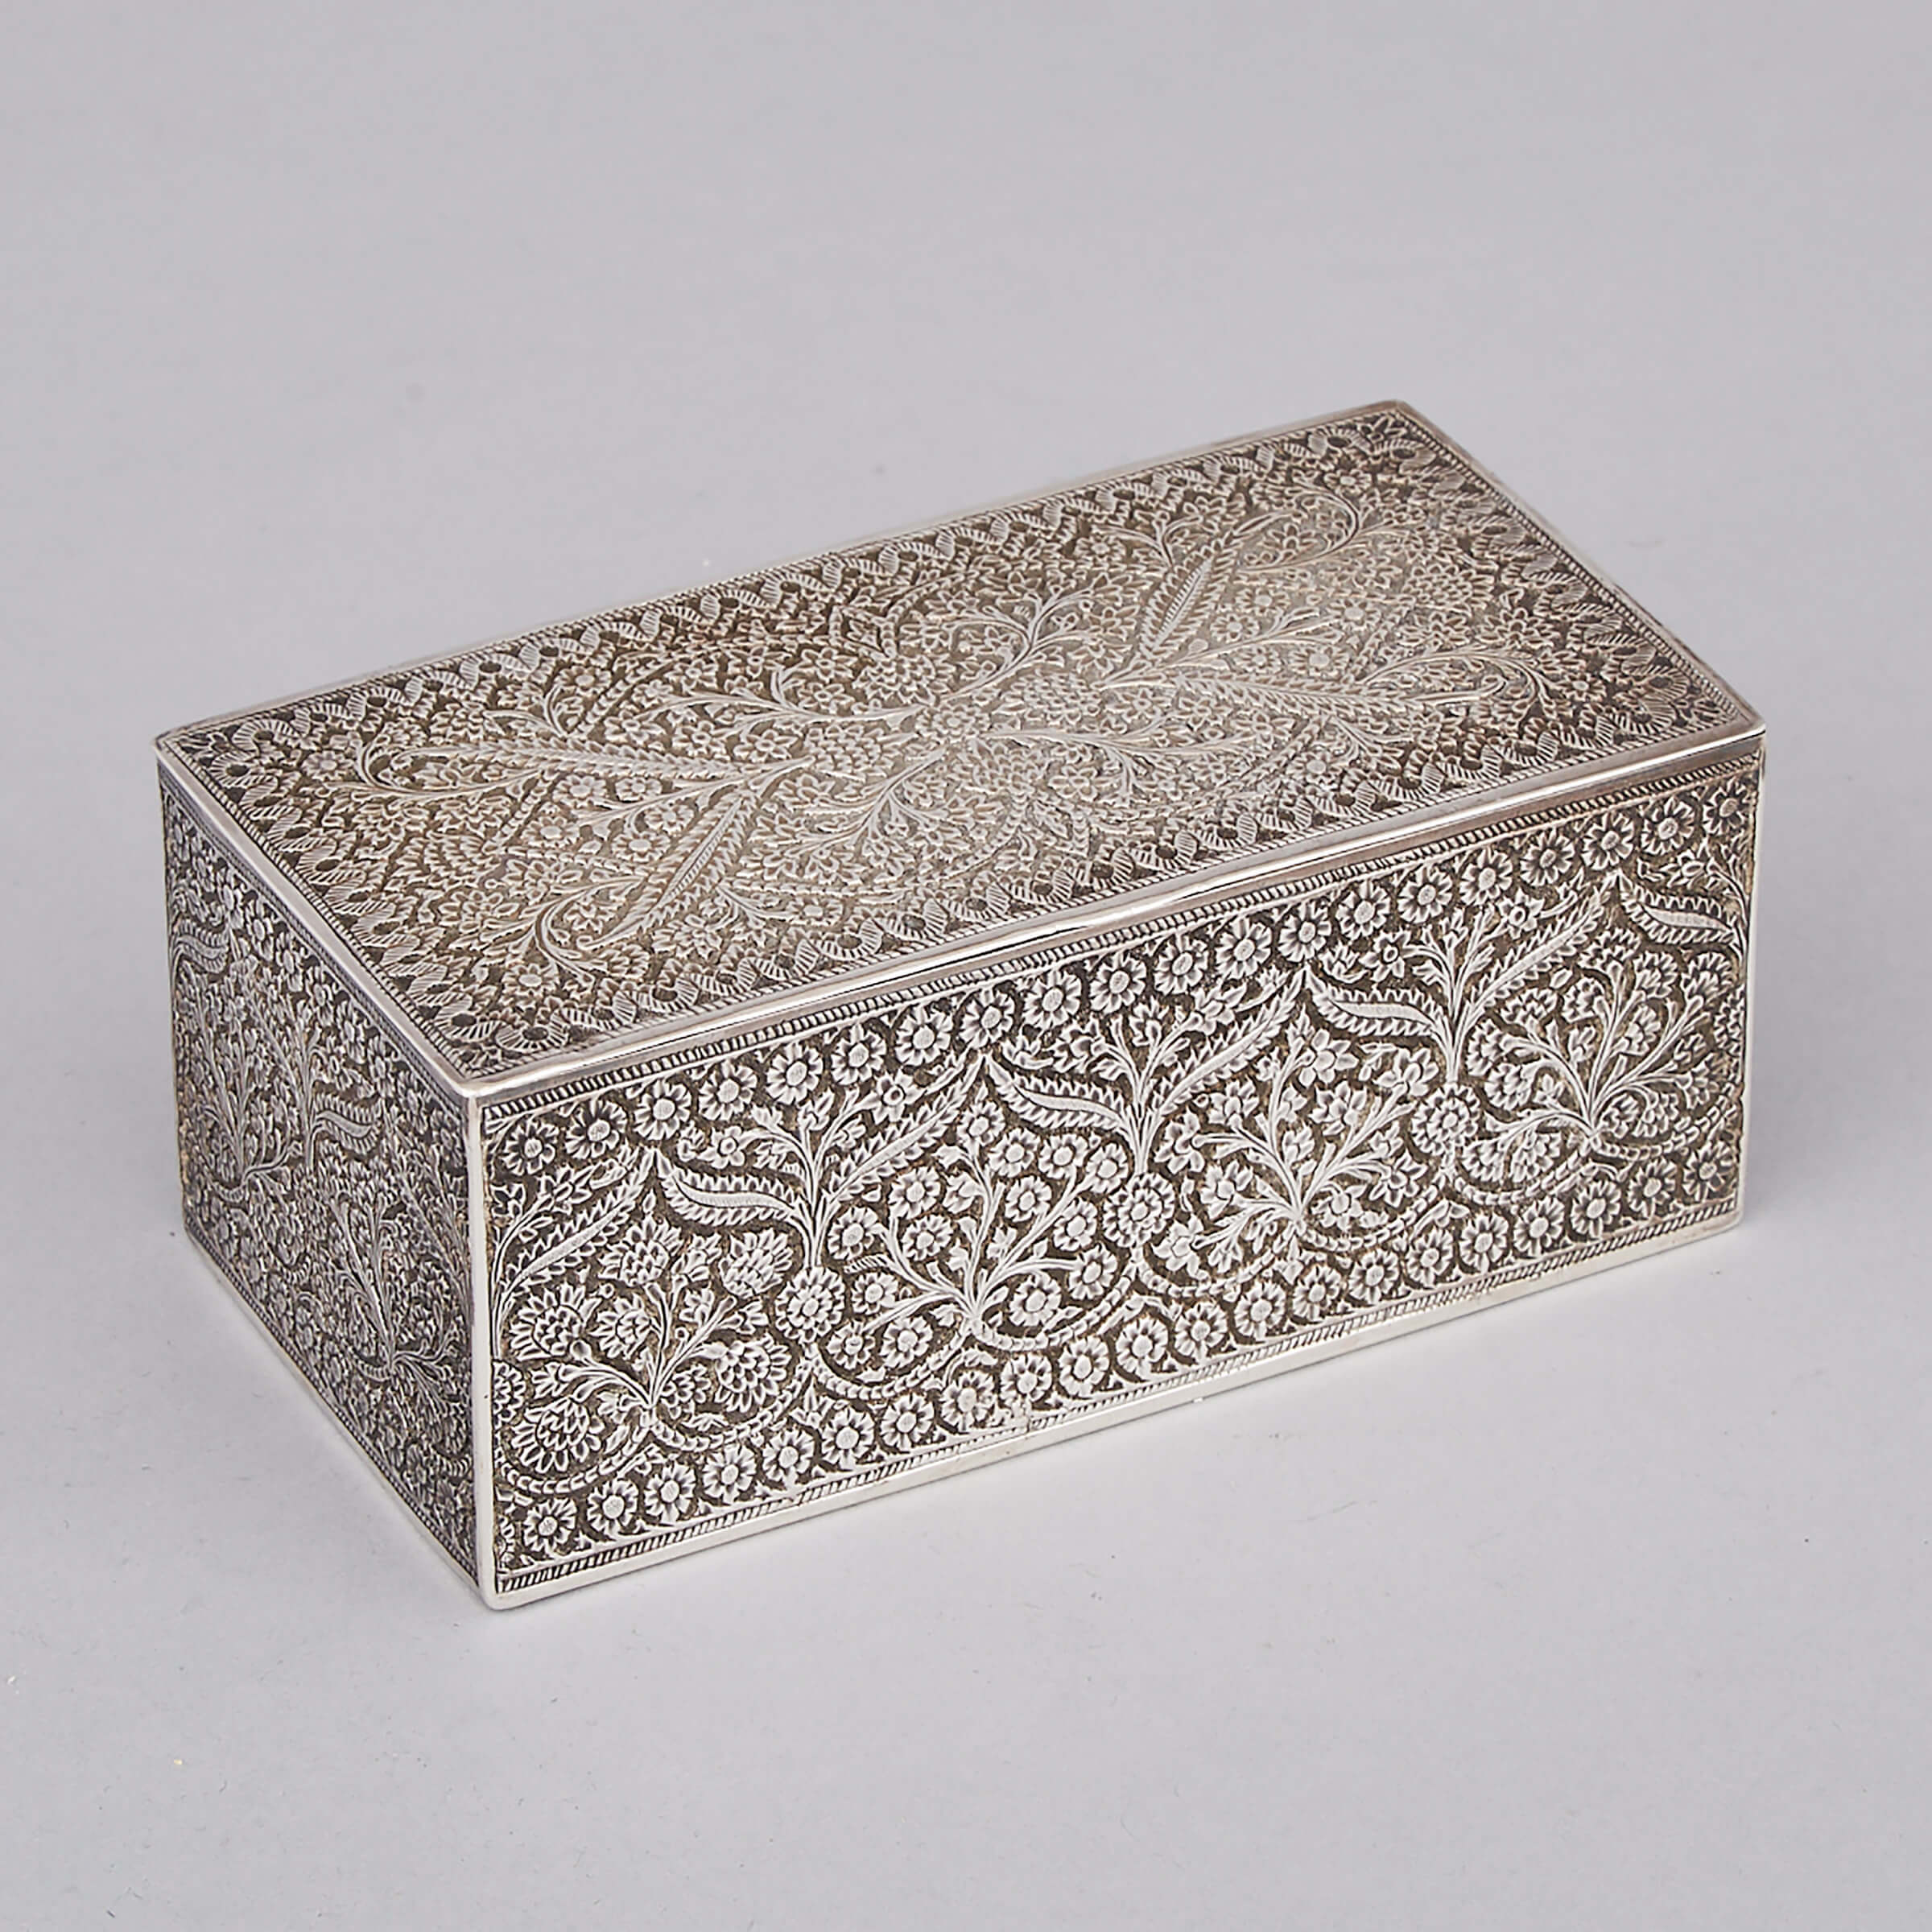 Indian Silver Rectangular Box, probably Kutch, early 20th century